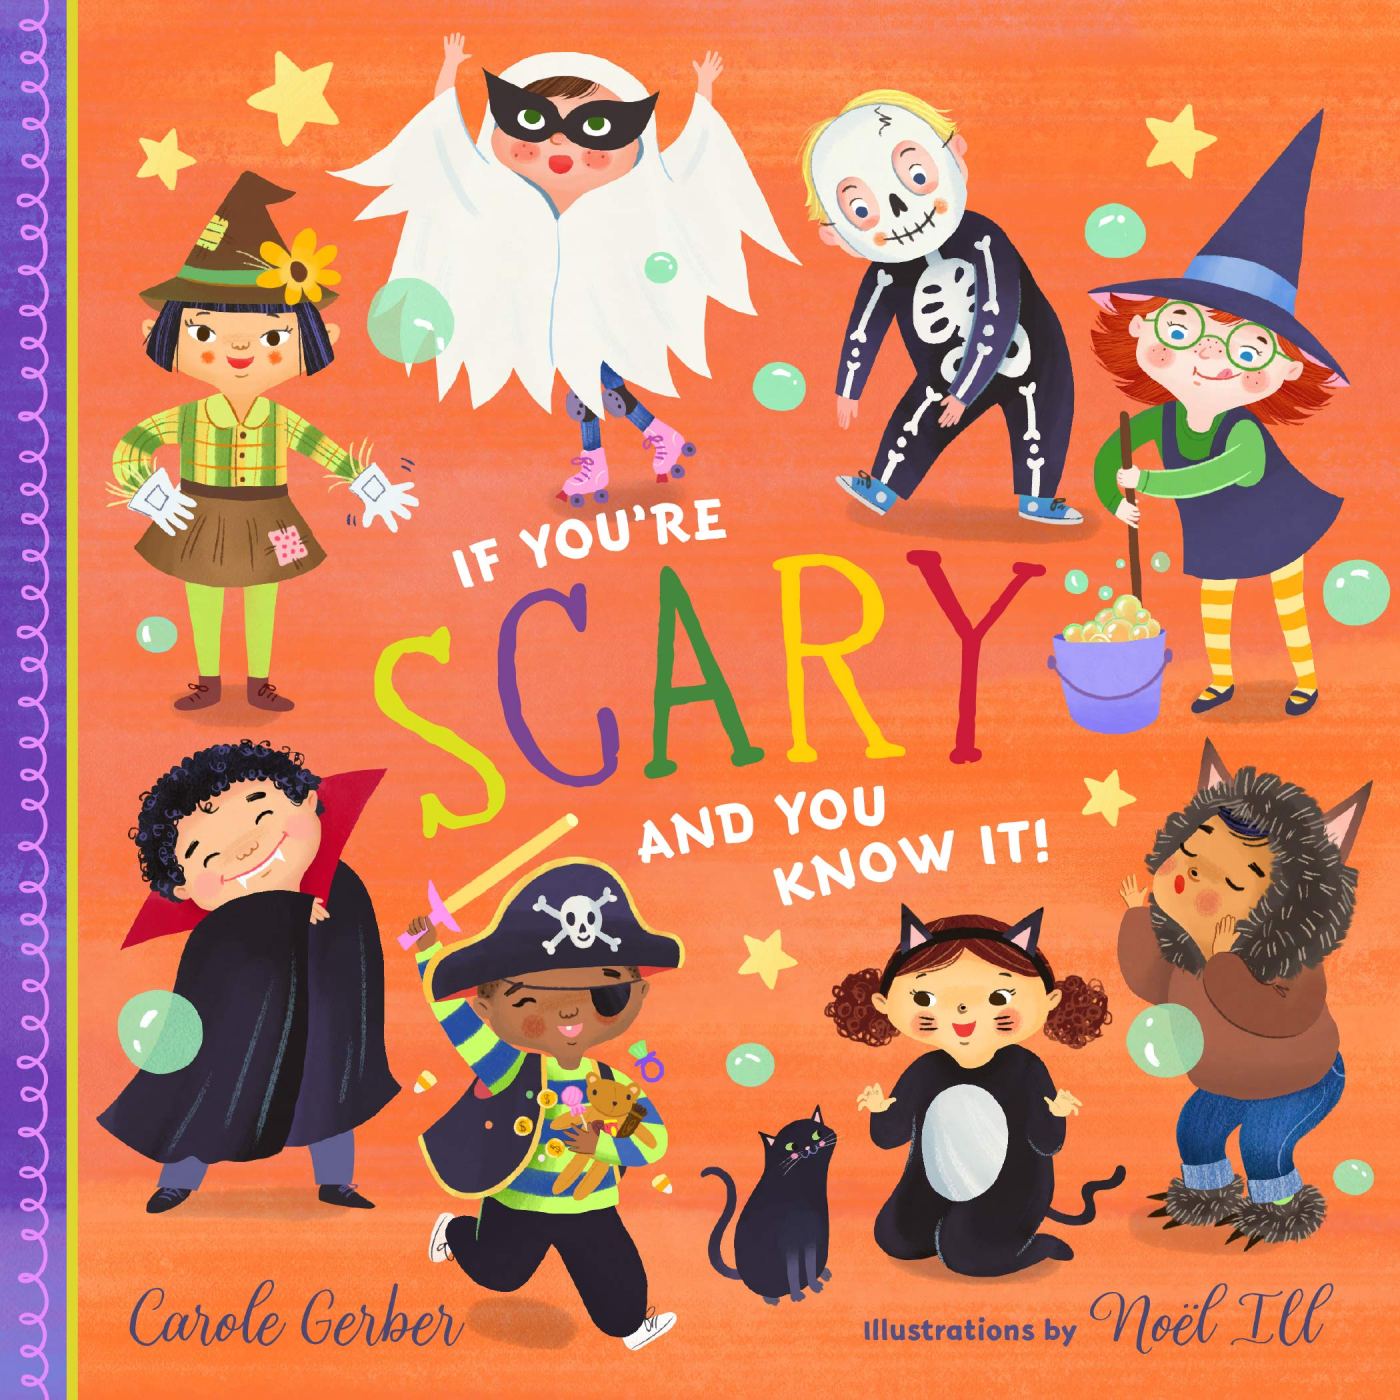 Front cover image, bright colours, lots of kids dresssed up as various Halloween creatures